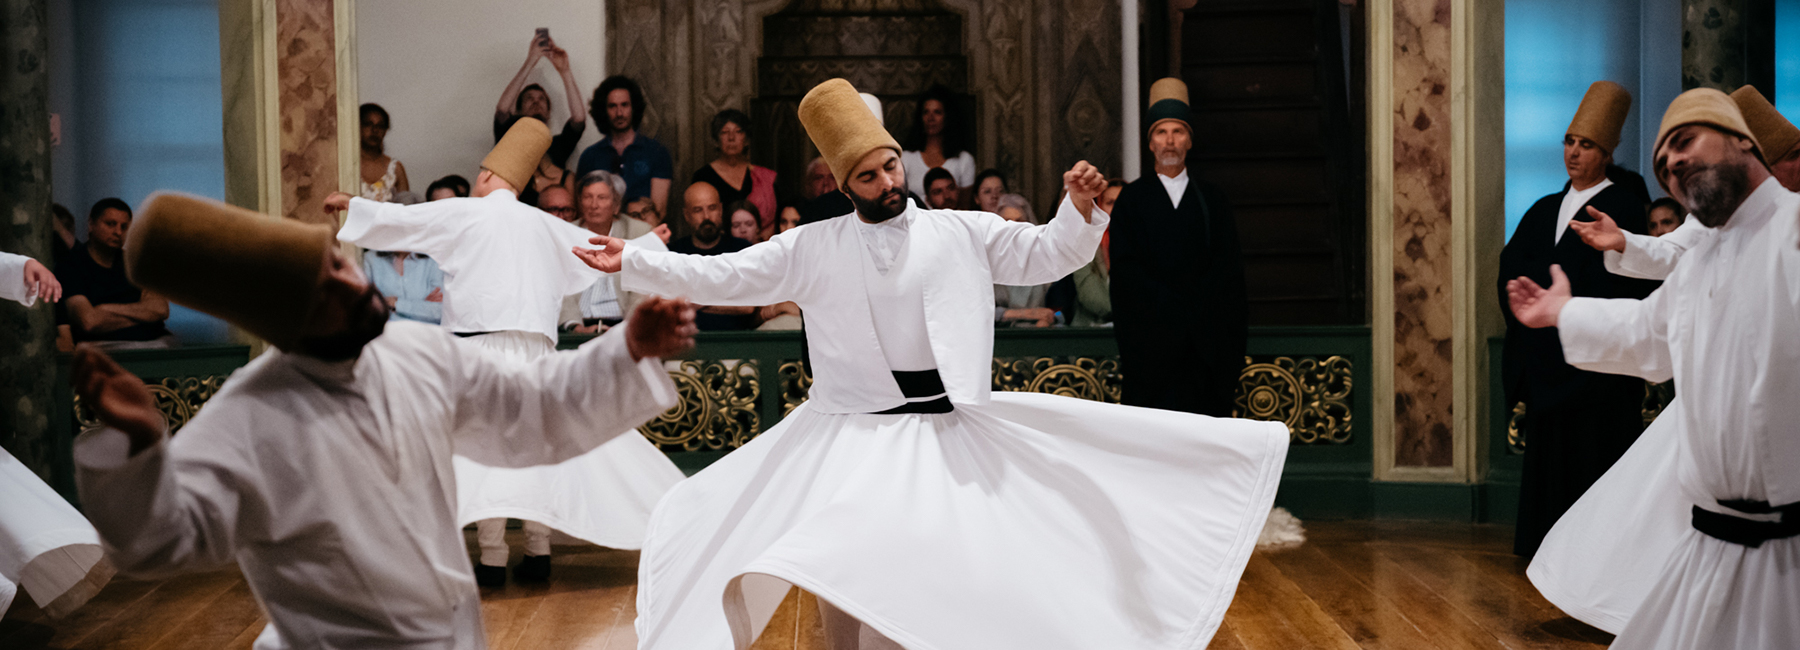 A whirling dervish in a white robe and a golden cap dances on a wooden floor while a group a spectators looks on. 